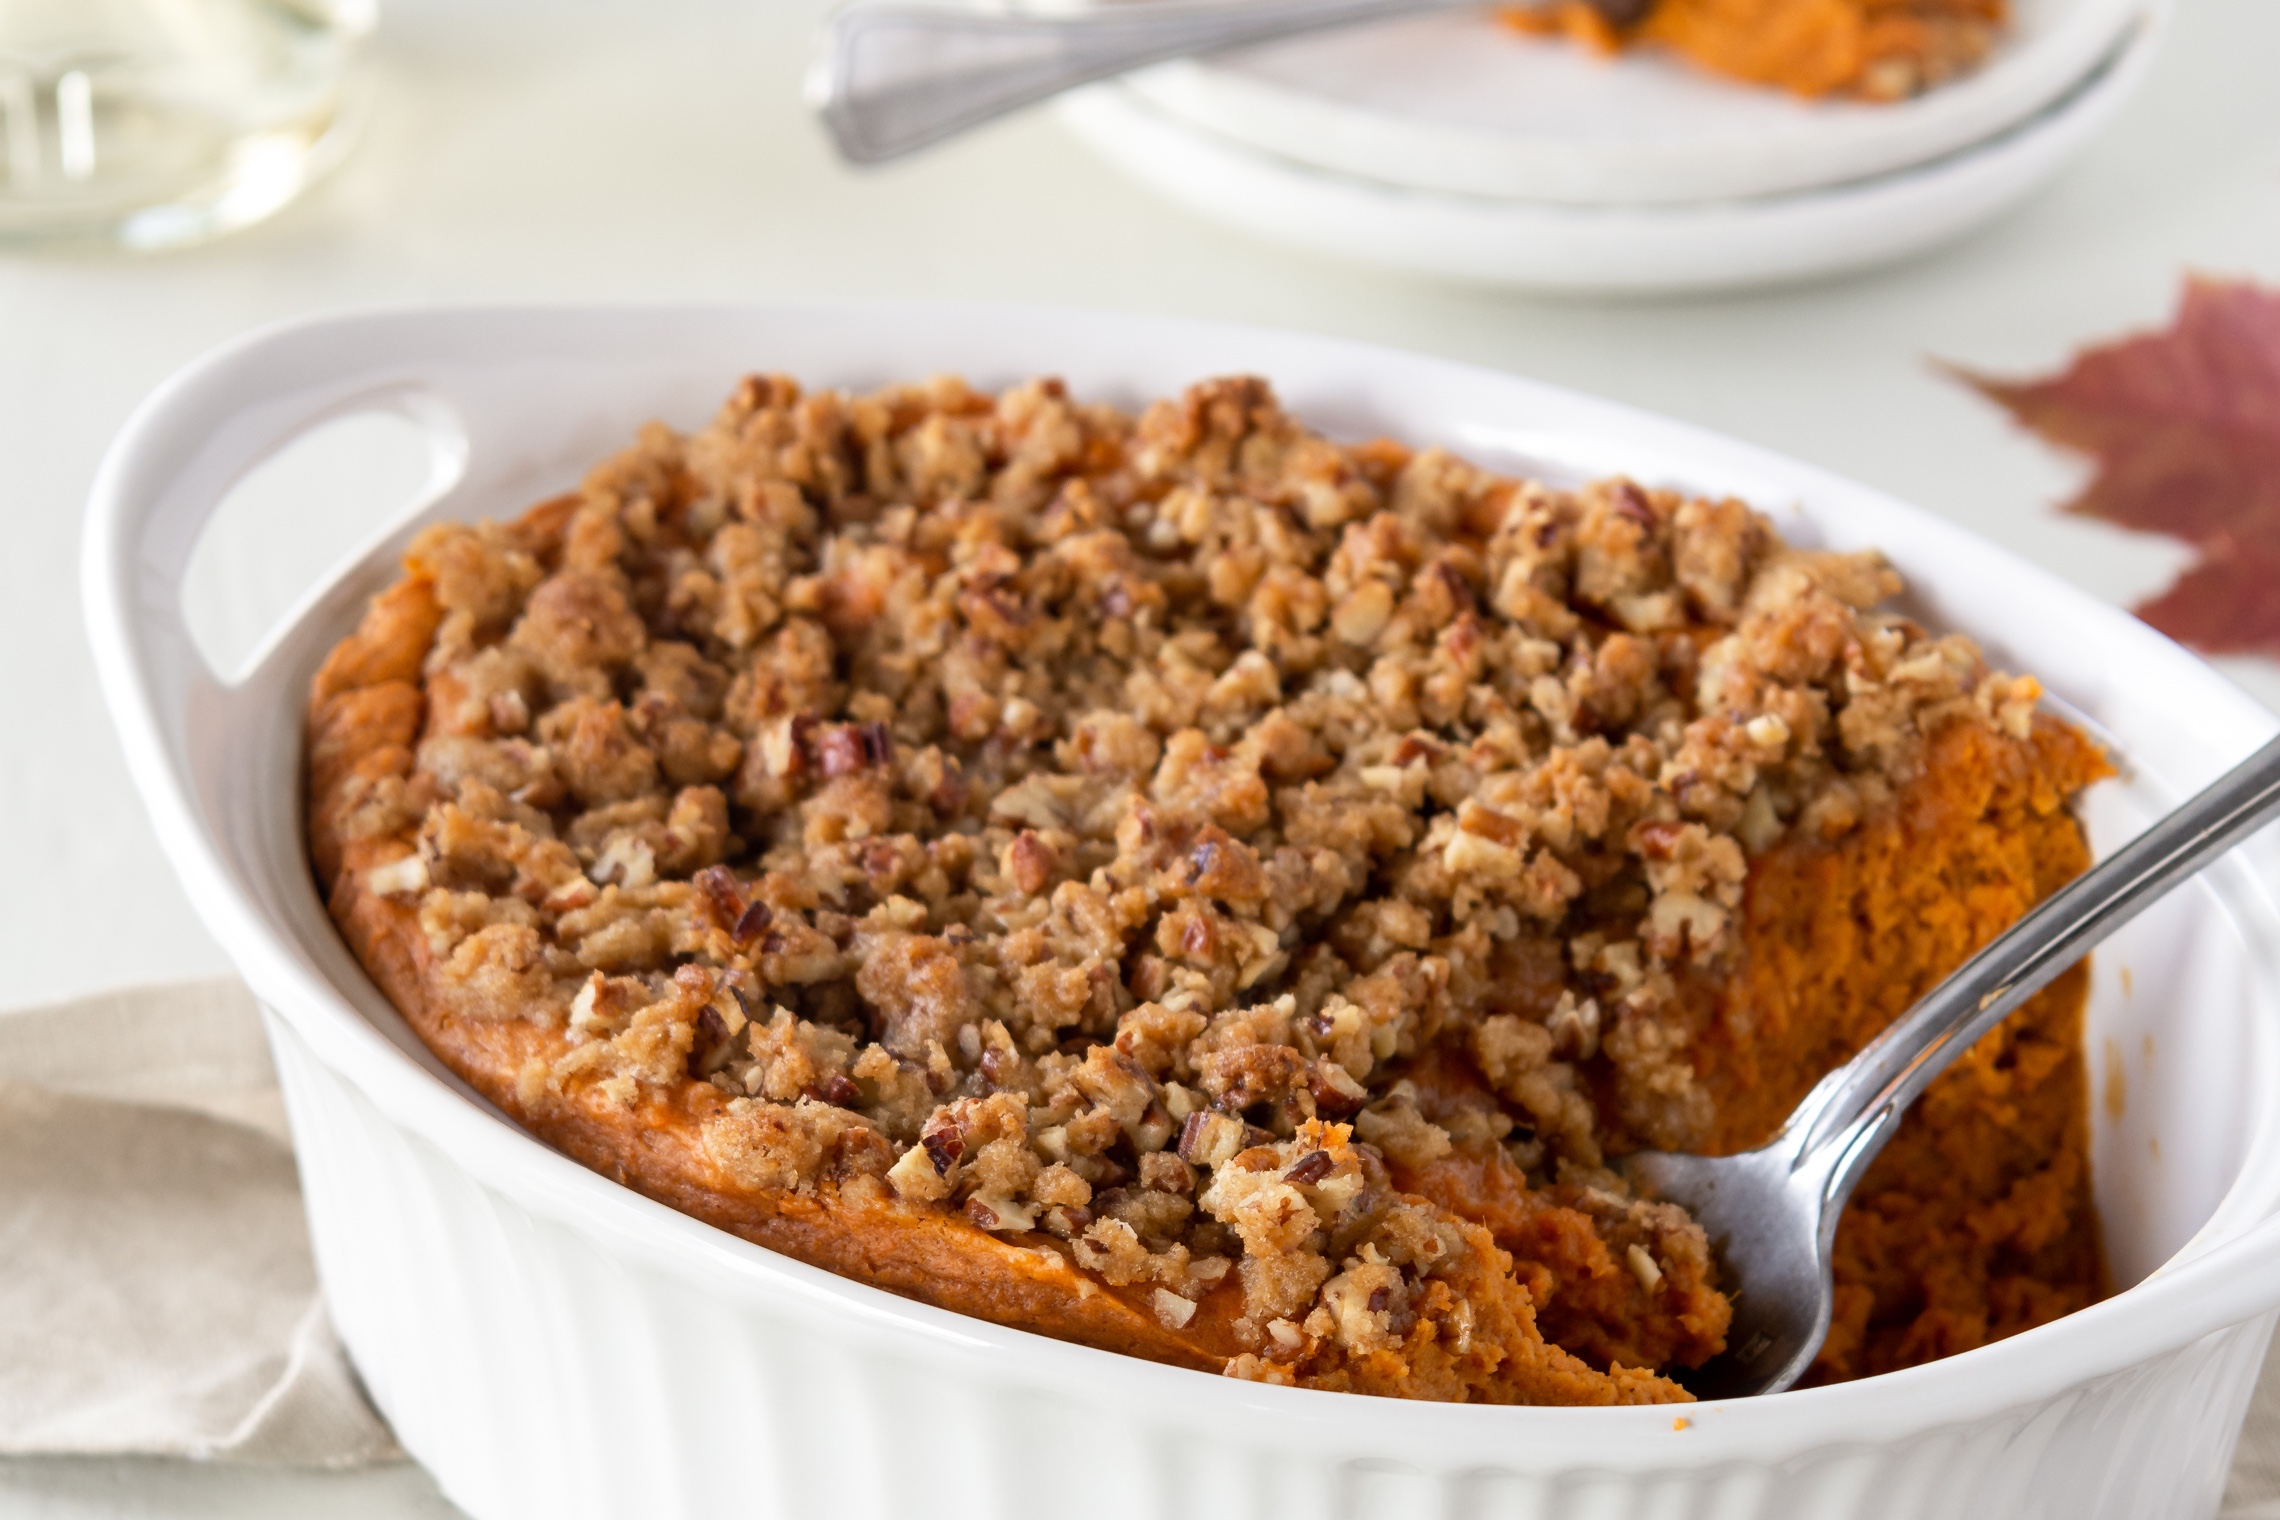 Sweet Potato Soufflé with Butter Pecan Topping